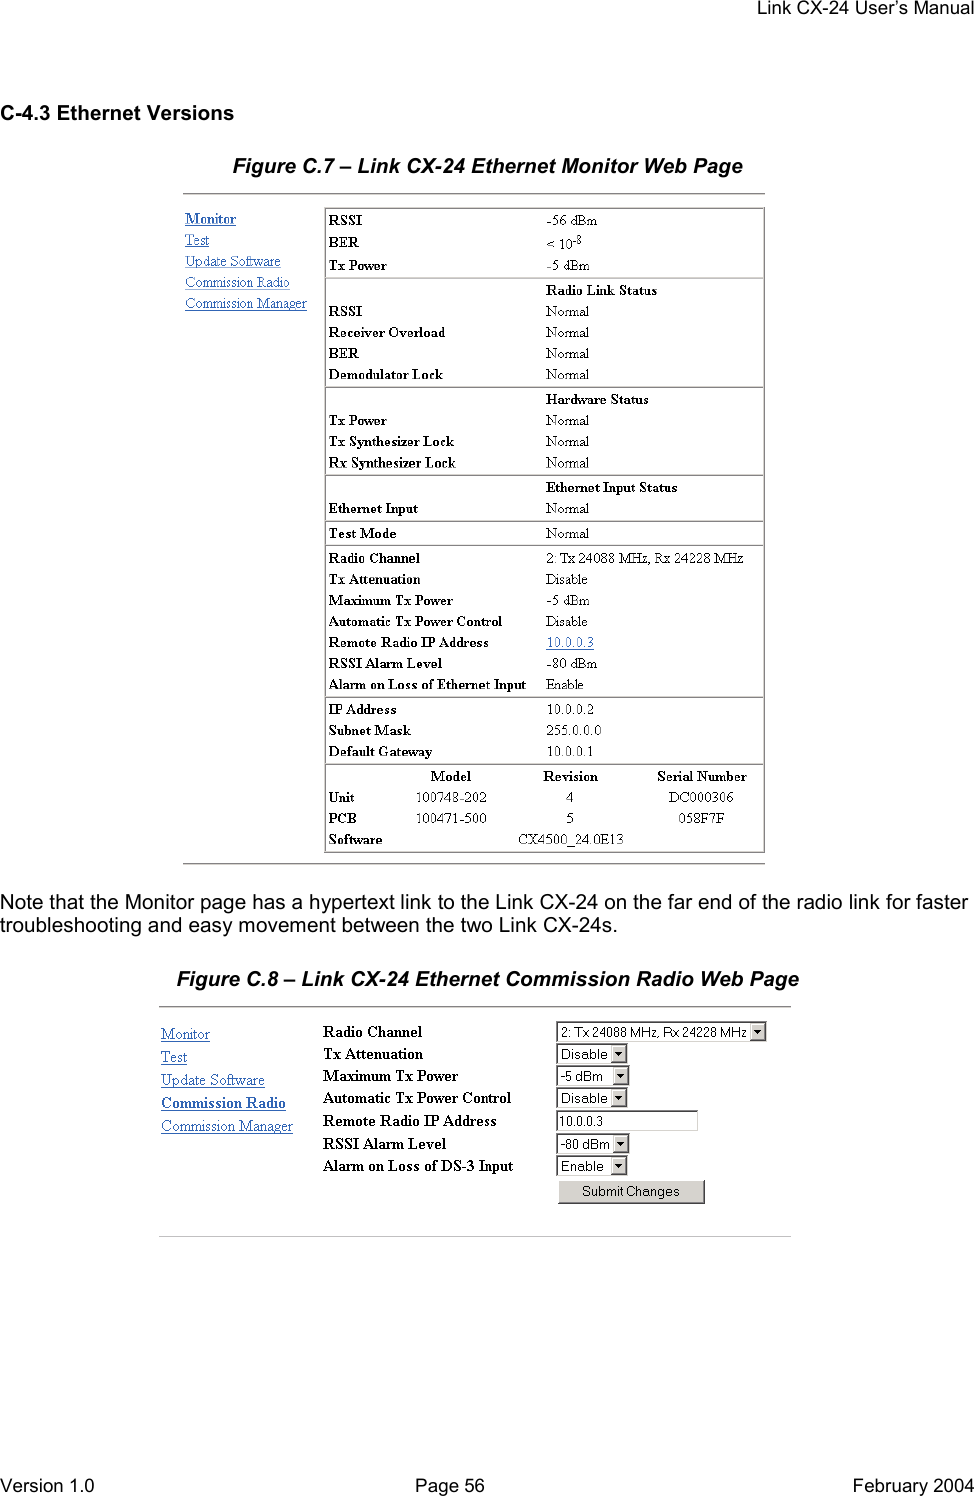     Link CX-24 User’s Manual Version 1.0  Page 56  February 2004 C-4.3 Ethernet Versions Figure C.7 – Link CX-24 Ethernet Monitor Web Page   Note that the Monitor page has a hypertext link to the Link CX-24 on the far end of the radio link for faster troubleshooting and easy movement between the two Link CX-24s. Figure C.8 – Link CX-24 Ethernet Commission Radio Web Page   